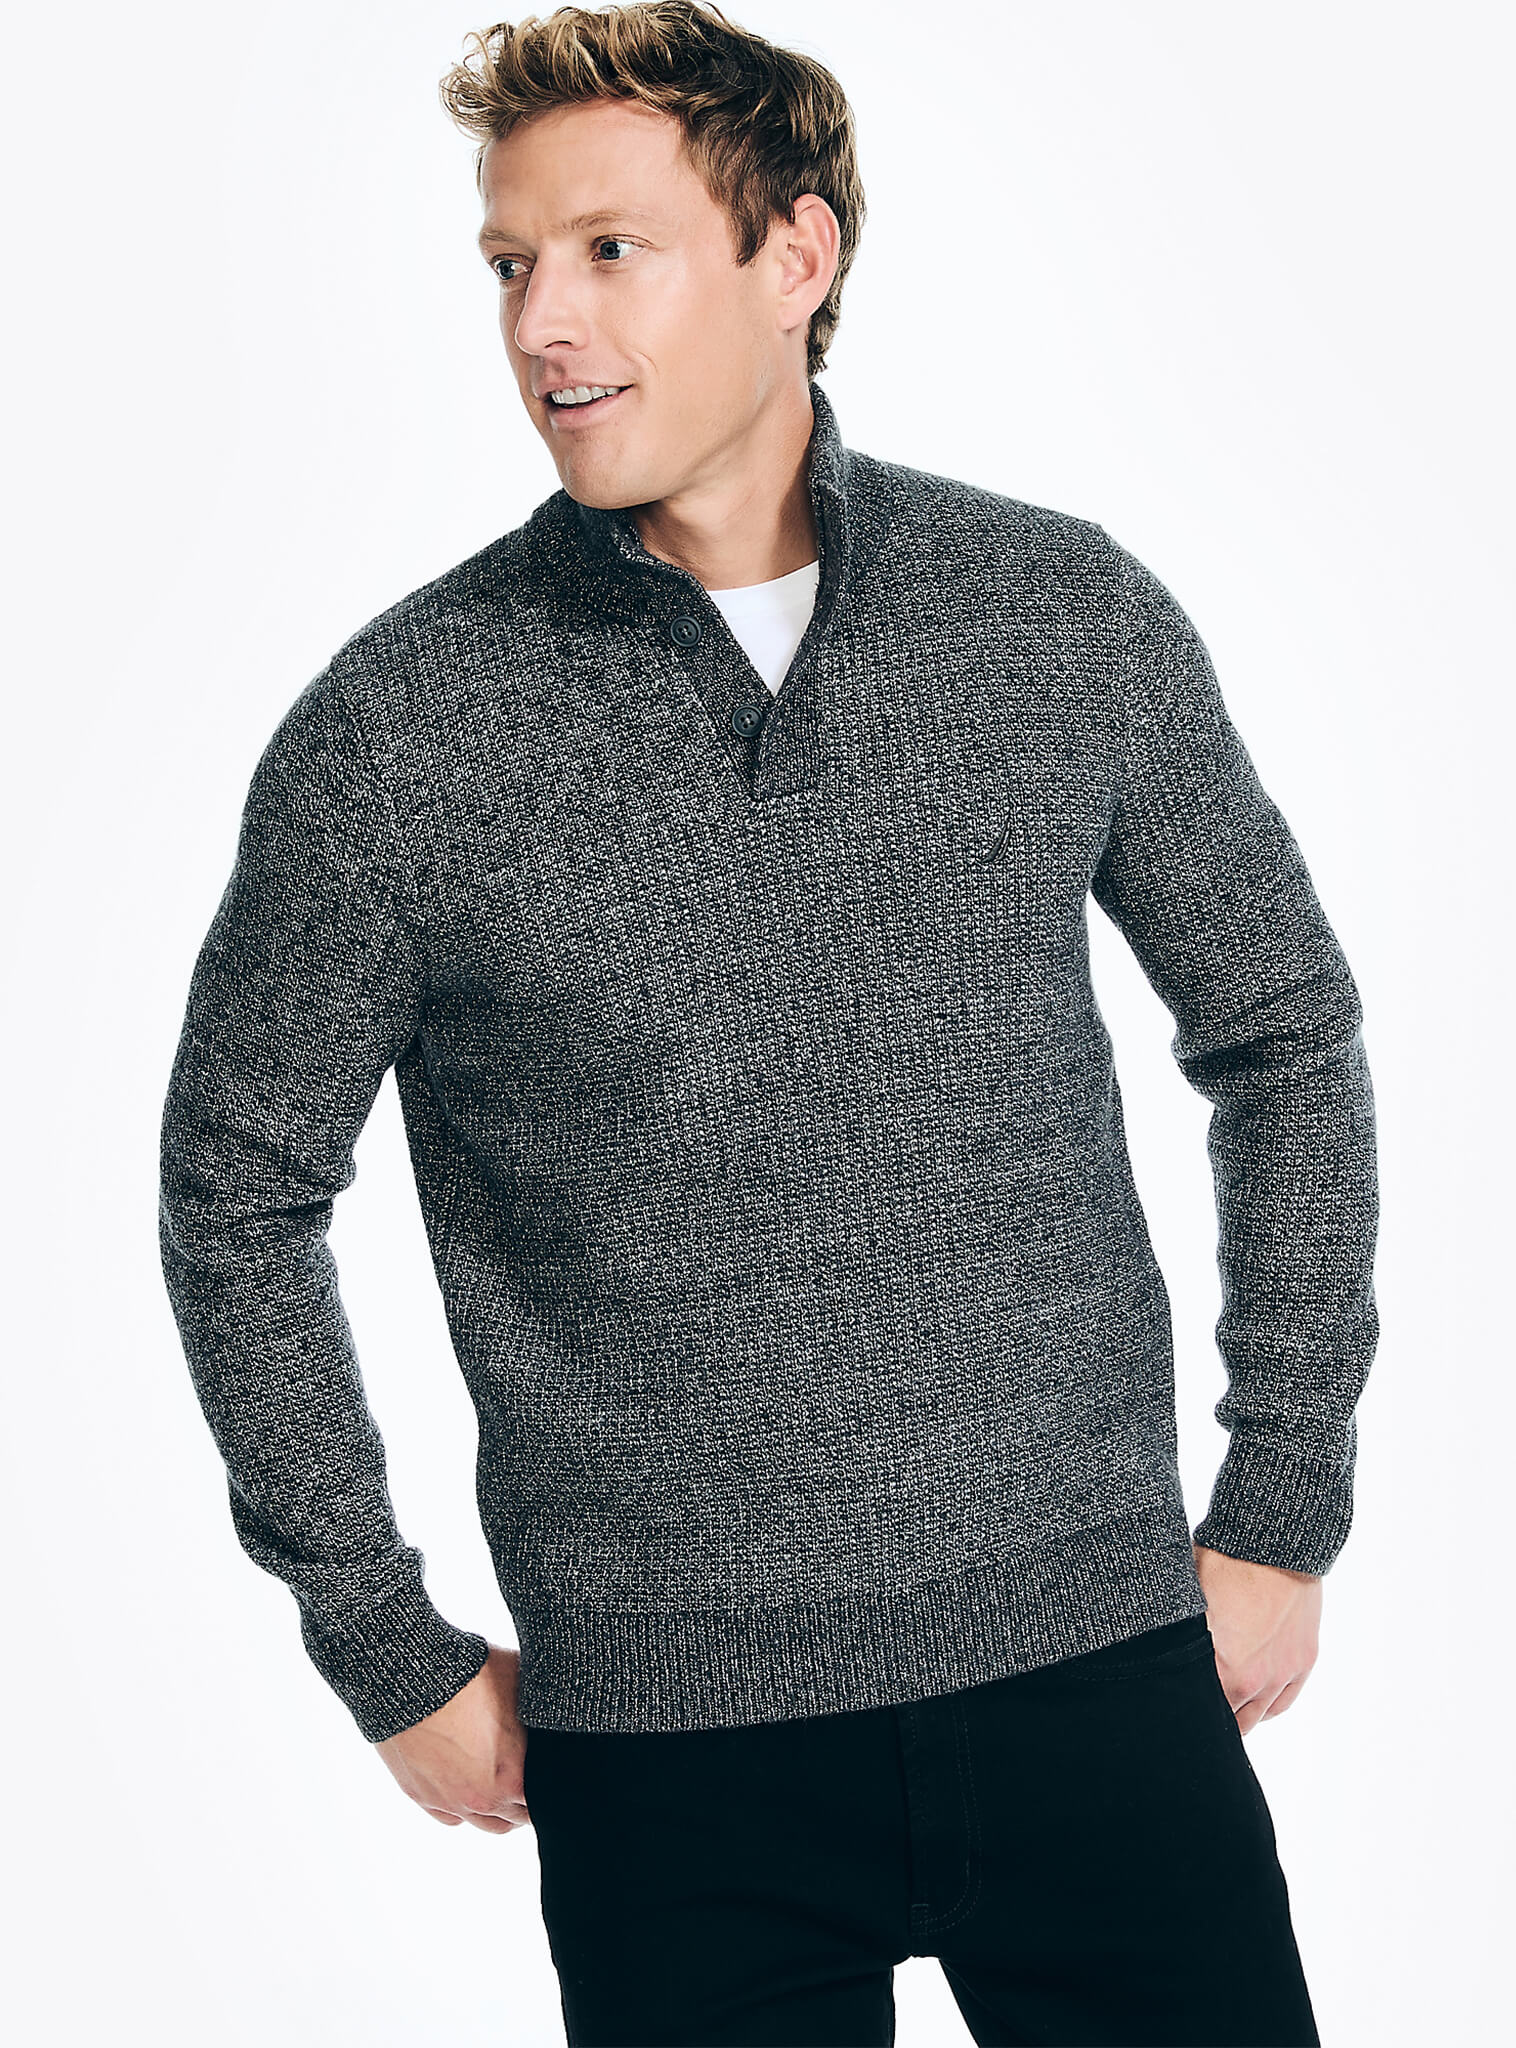 Sweater Manga Larga Cuello Botones Gris Sustainably Crafted Hombre